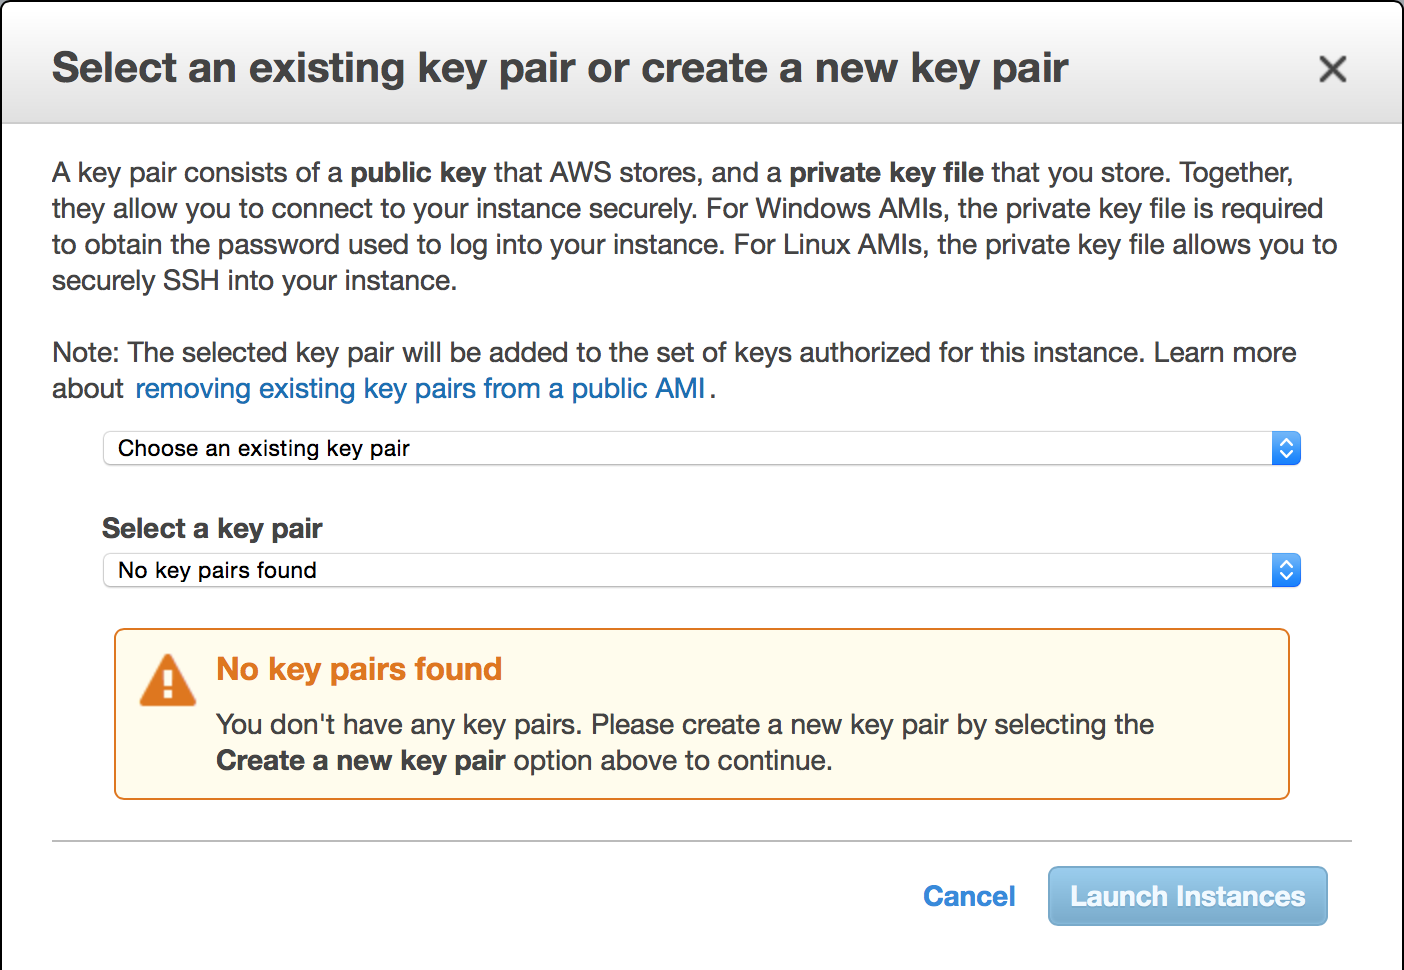 KeyPair: AWS generates a keypair for you  (make sure to save the PEM file!)